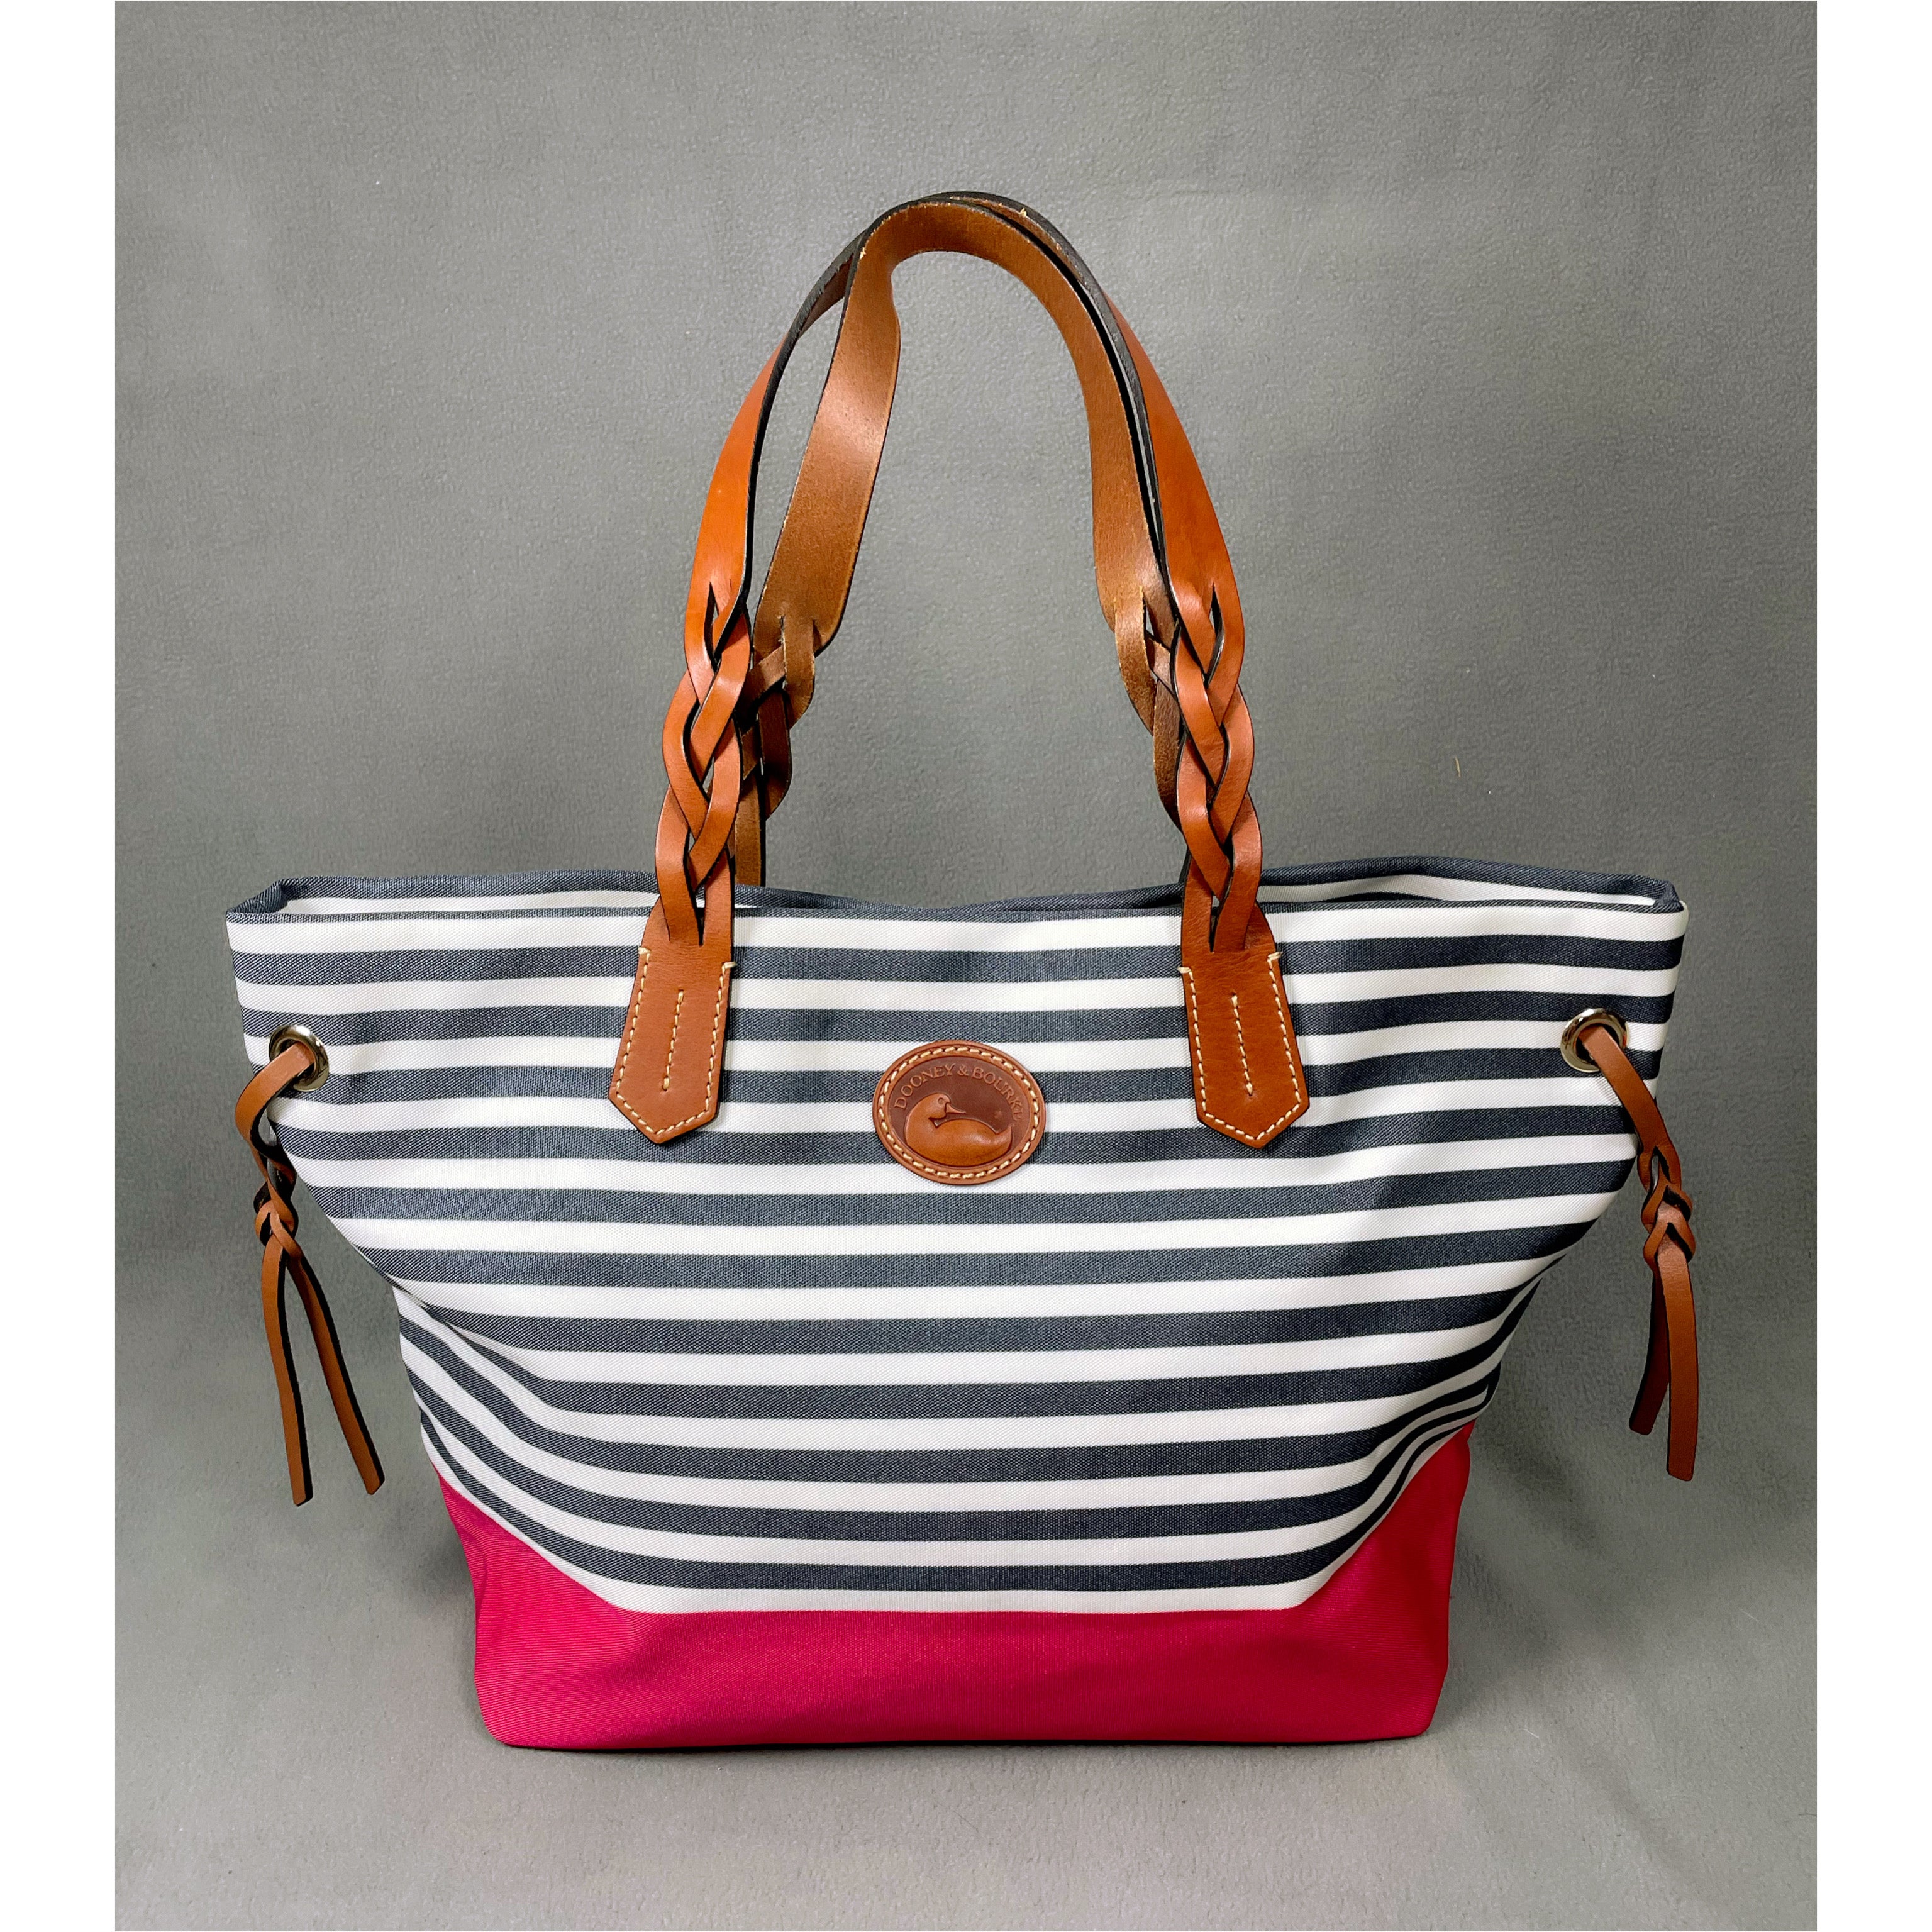 Dooney & Bourke red, white, and blue tote